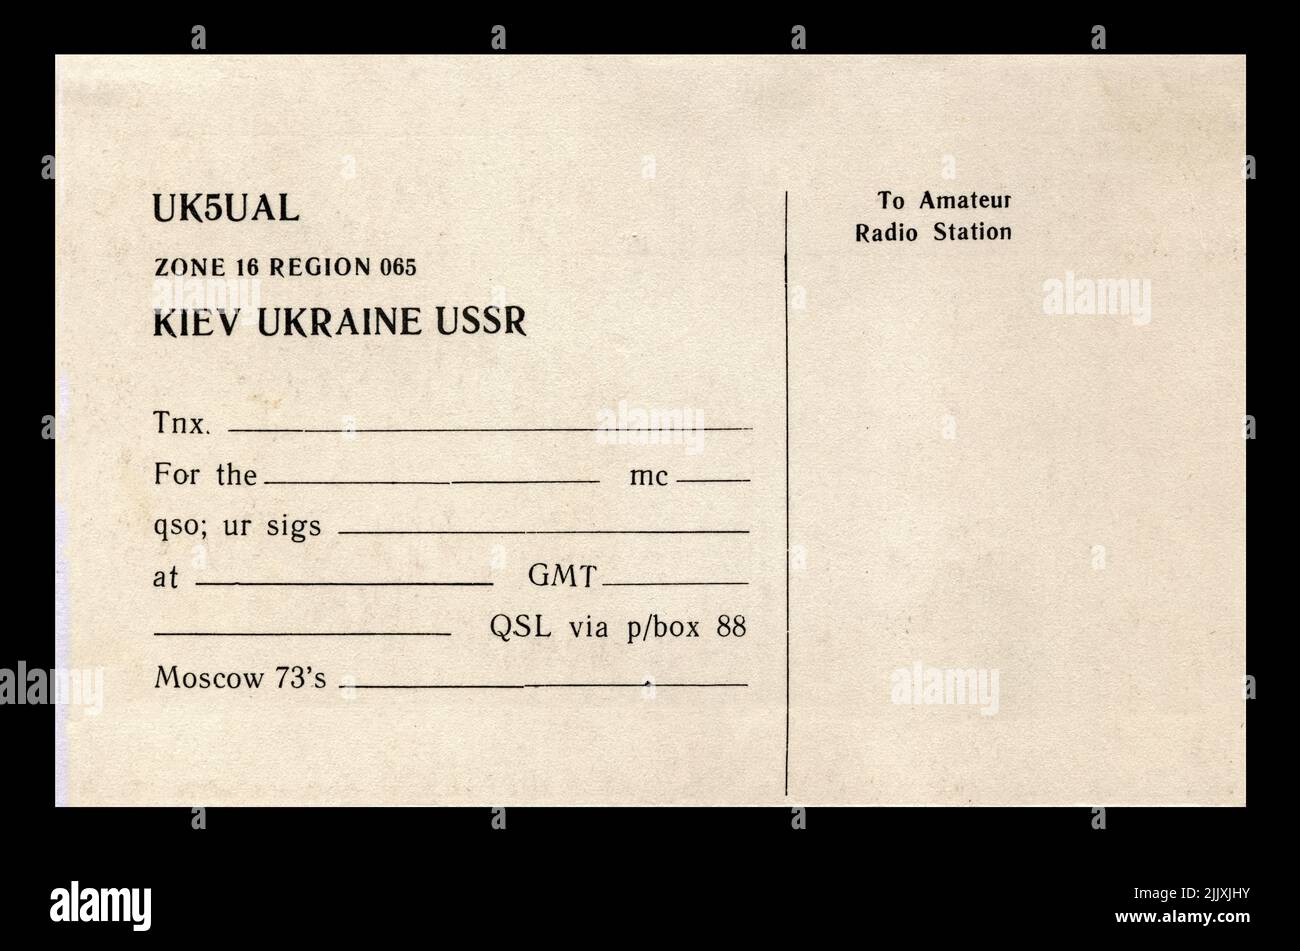 vintage empty QSL radio card, circa 1980s. paper document isolated on black background Stock Photo